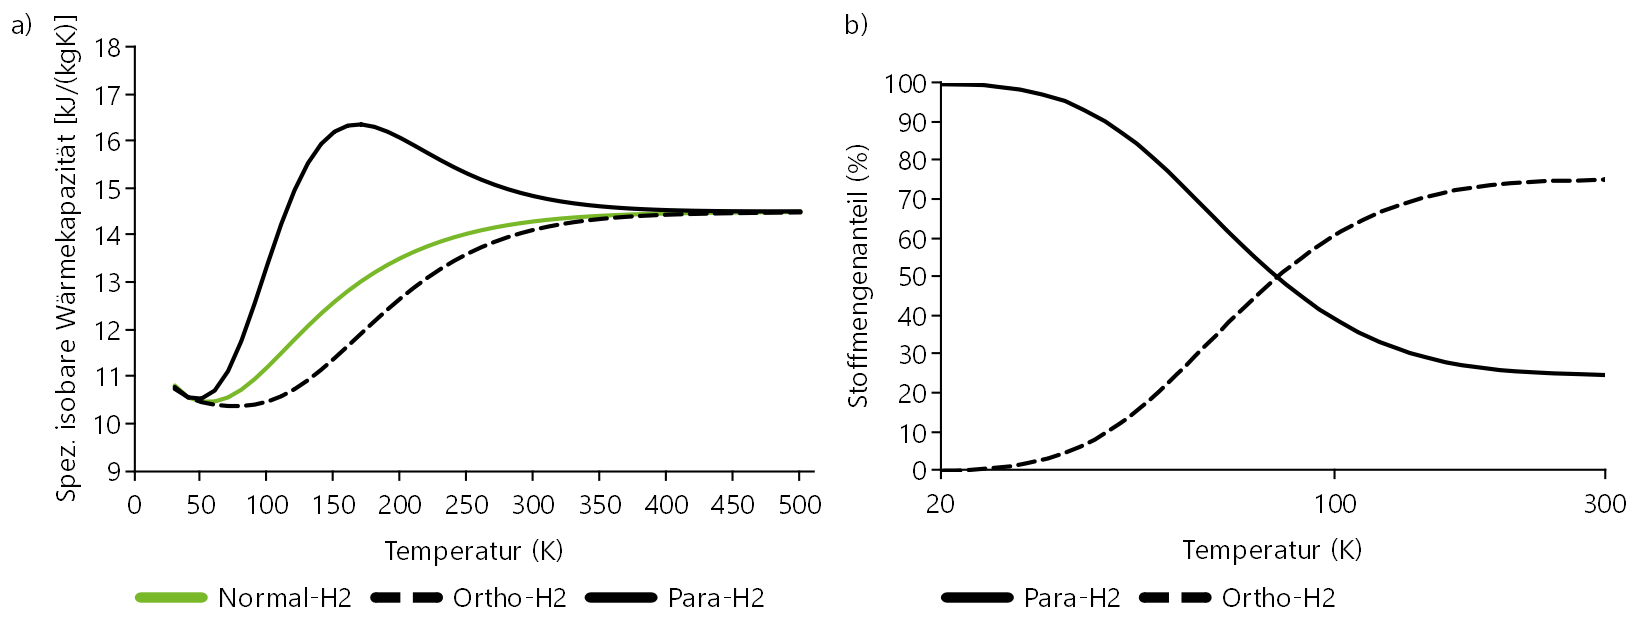 Figure 2 a) Temperature dependent specific isobaric heat capacity of para-, ortho- and normal hydrogen. b) Temperature dependent composition of equilibrium para- and ortho-hydrogen. 